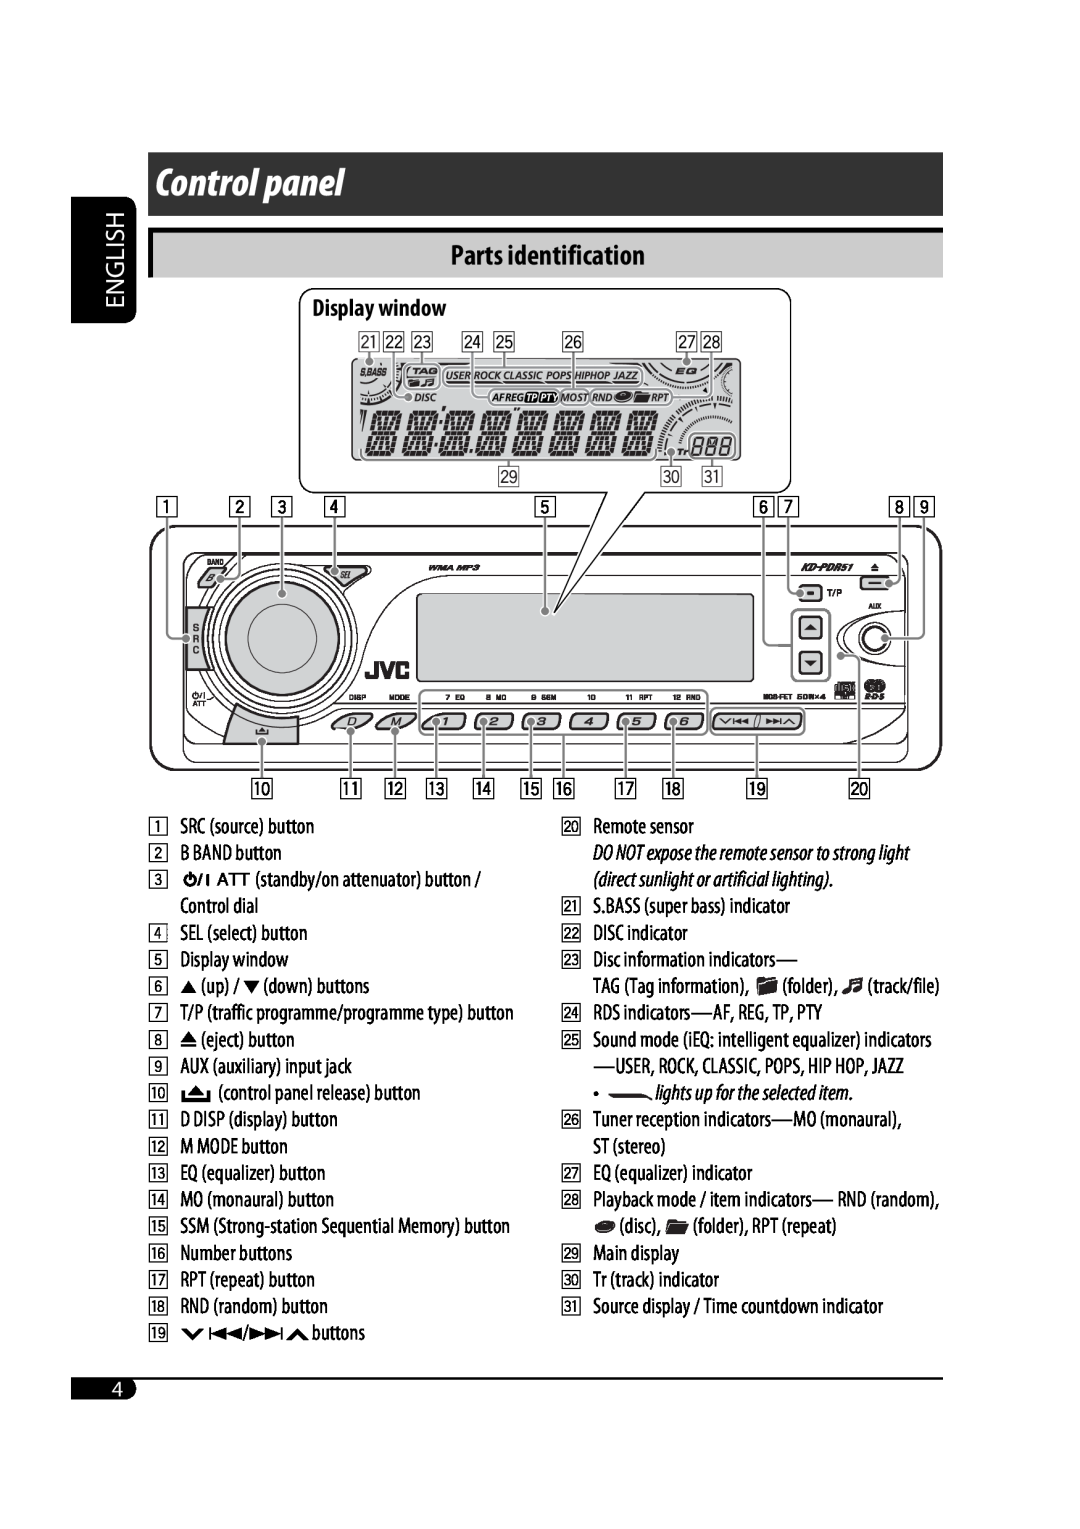 JVC GET0425-001A Control panel, Parts identification, English, Display window, direct sunlight or artificial lighting 